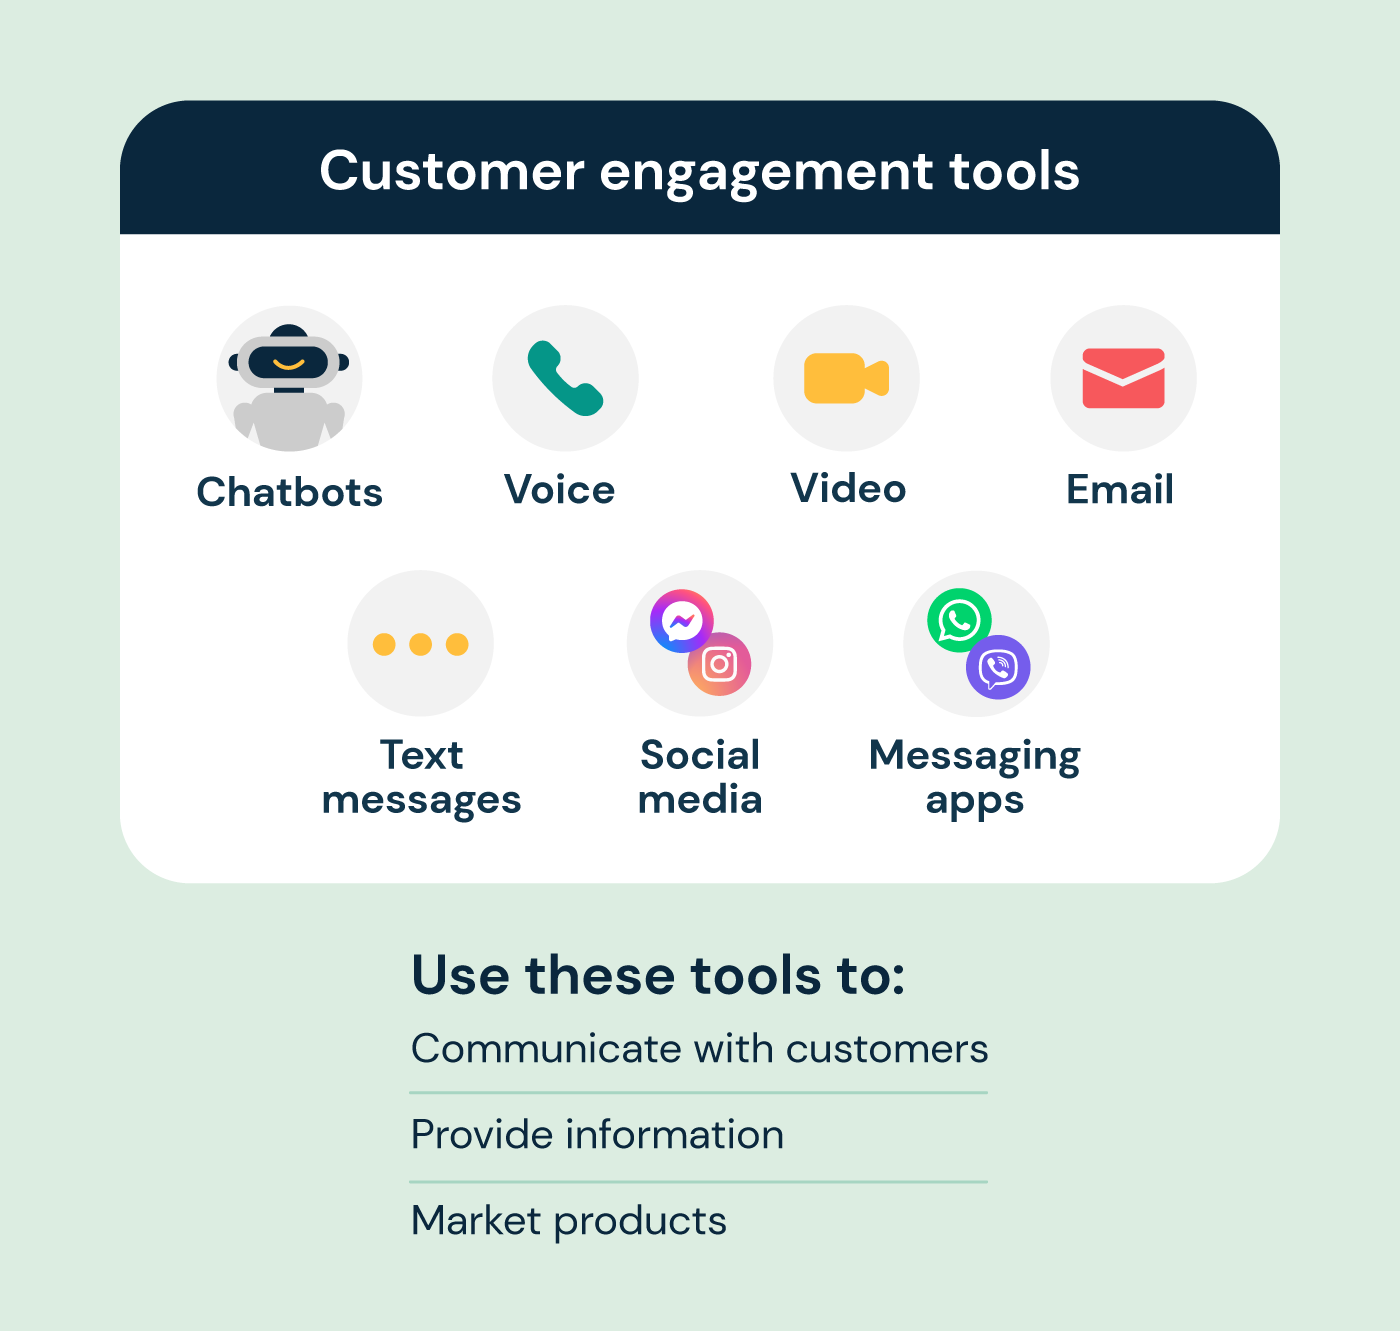 The types of customer engagement tools